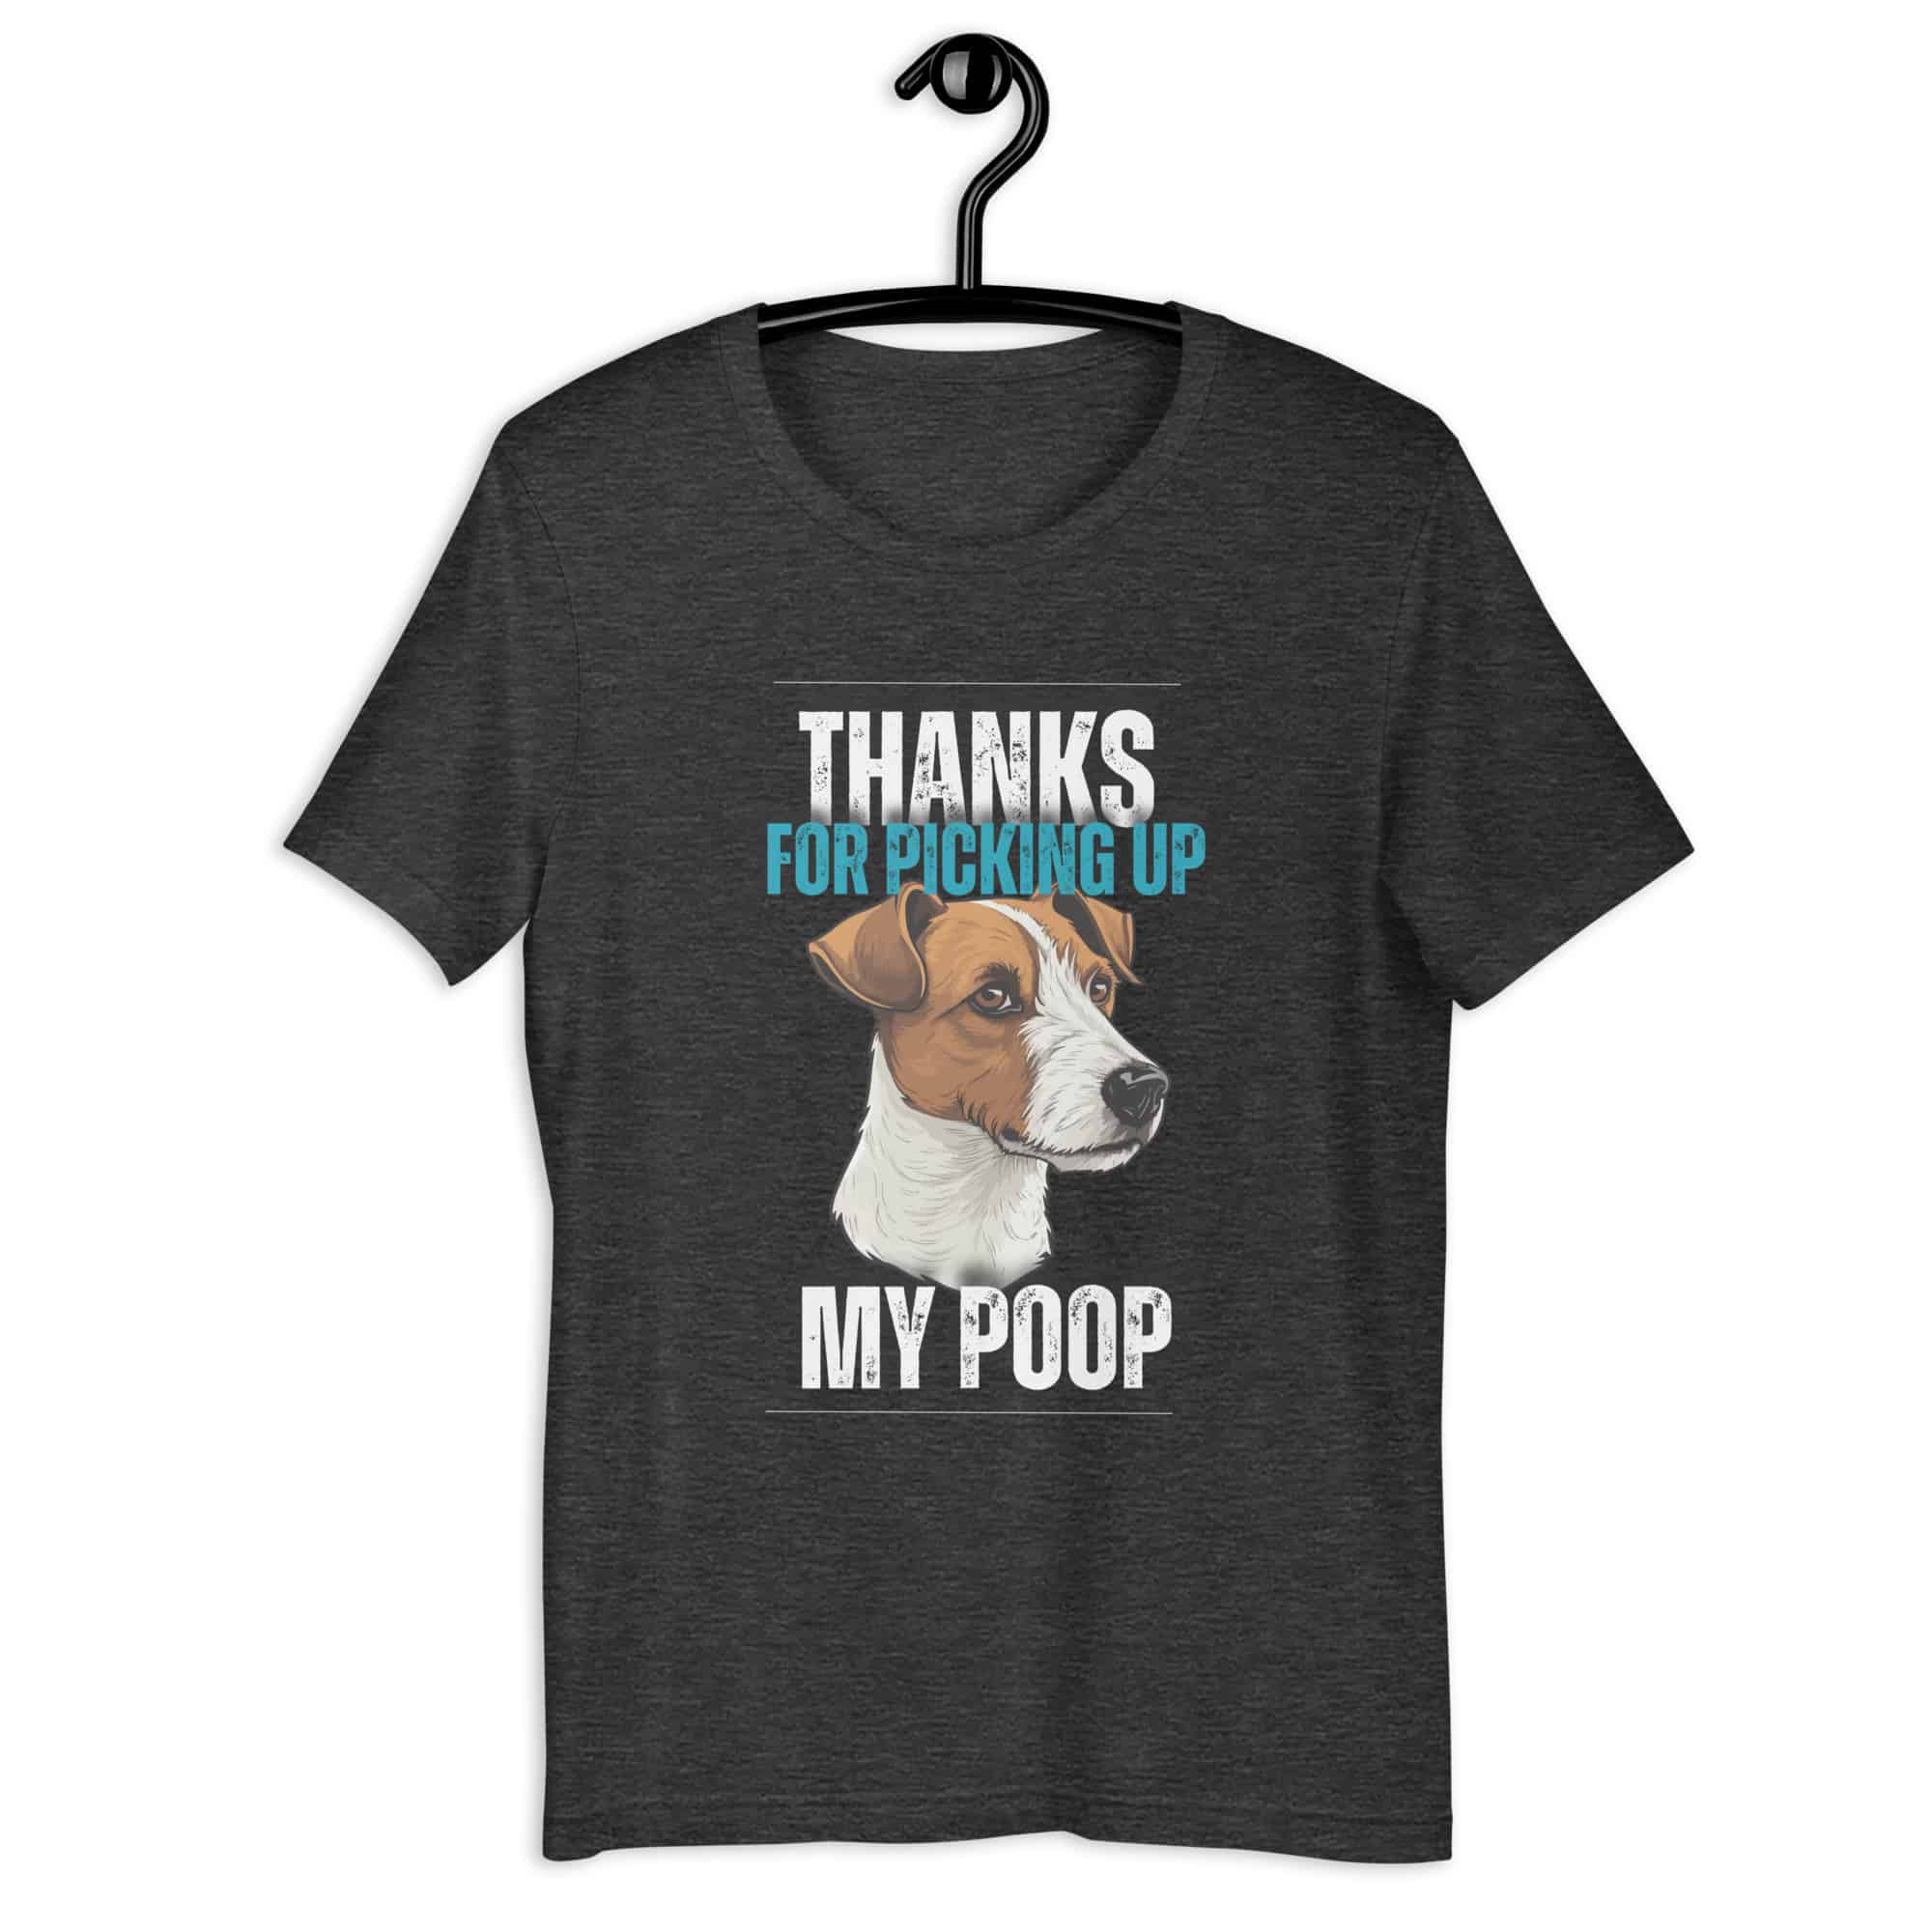 Thanks For Picking Up My POOP Funny Retrievers Unisex T-Shirt. Dark Grey